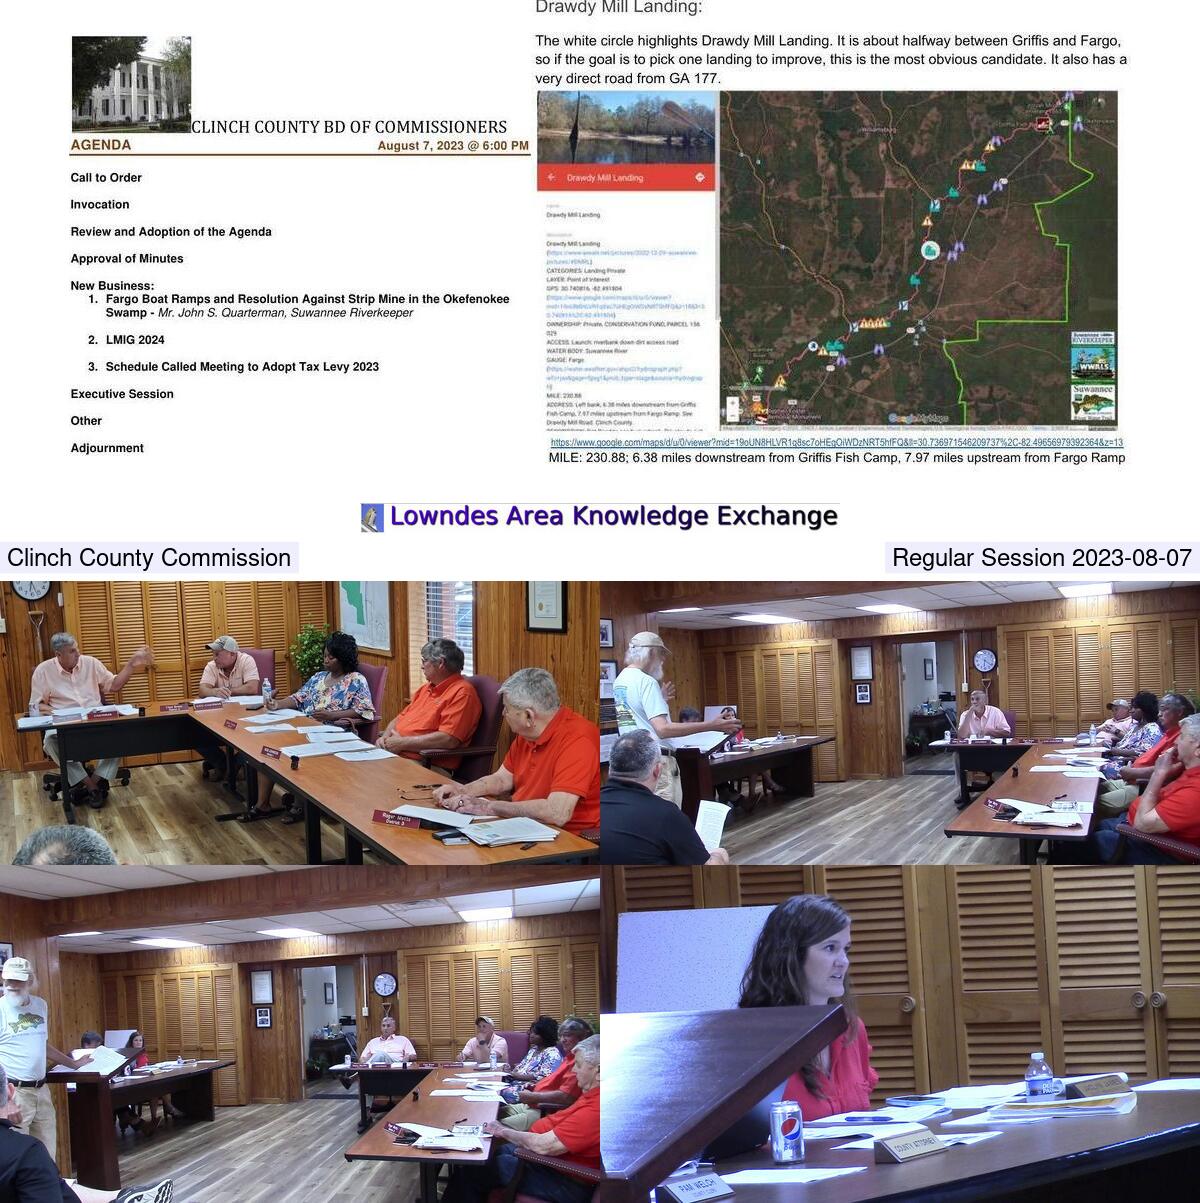 [Collage @ Clinch County Commission 2023-08-07]